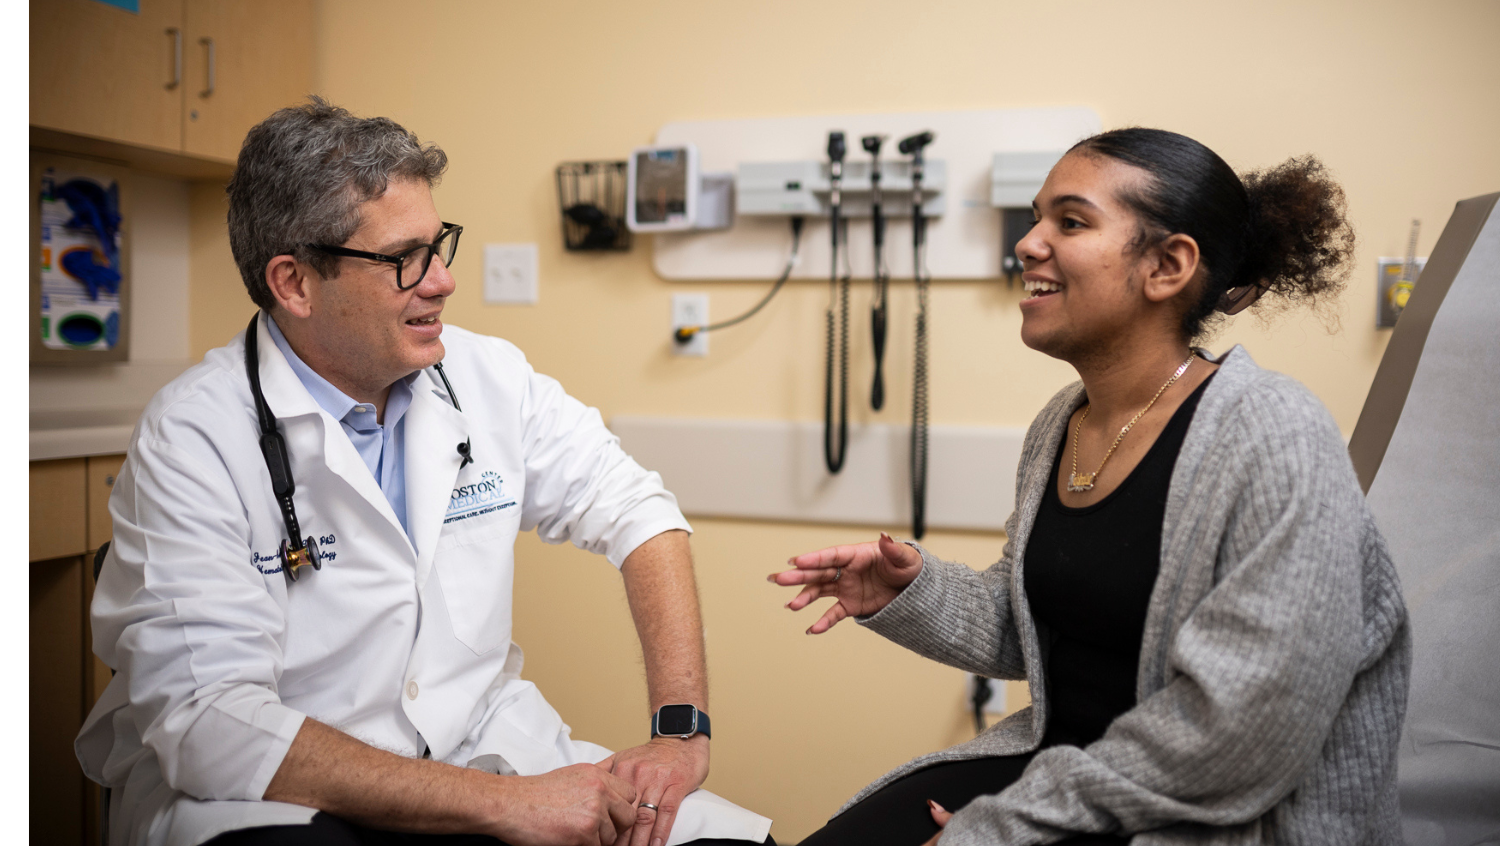 a doctor — a white man with glasses and a white lab coat — is sitting with his patient, a Black woman, who is smiling and talking with her hands. 